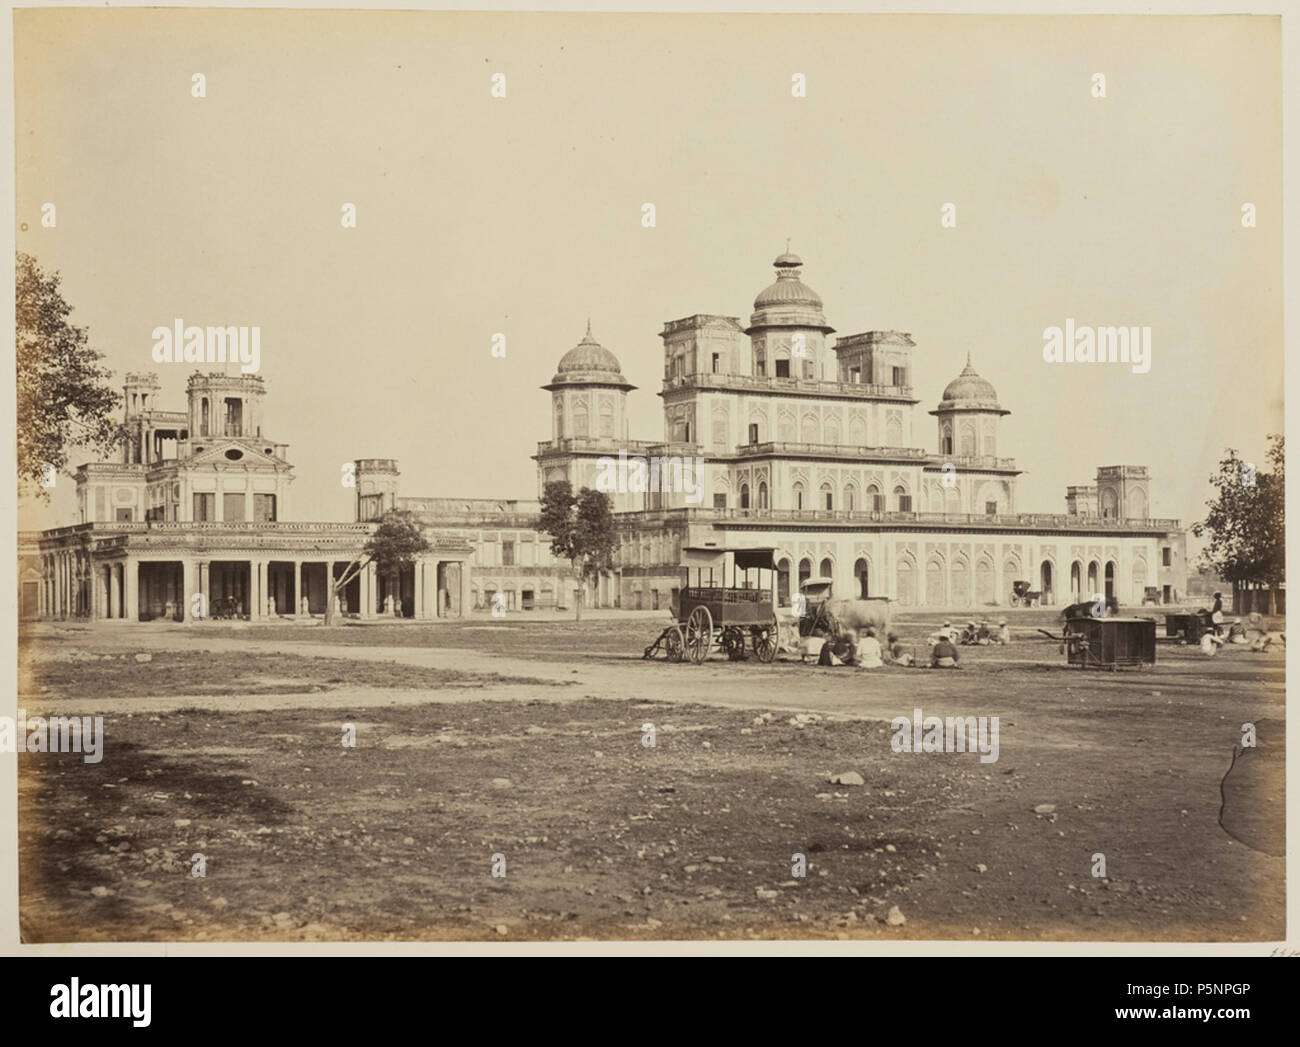 N/A. English: Bara Chattar Manzil and Farhat Bakhsh in Lucknow - view from the south . 1862. Charles Shepherd and Arthur Robertson 169 Bara Chattar Manzil and Farhat Bakhsh - view from the south - Lucknow in 1862 Stock Photo